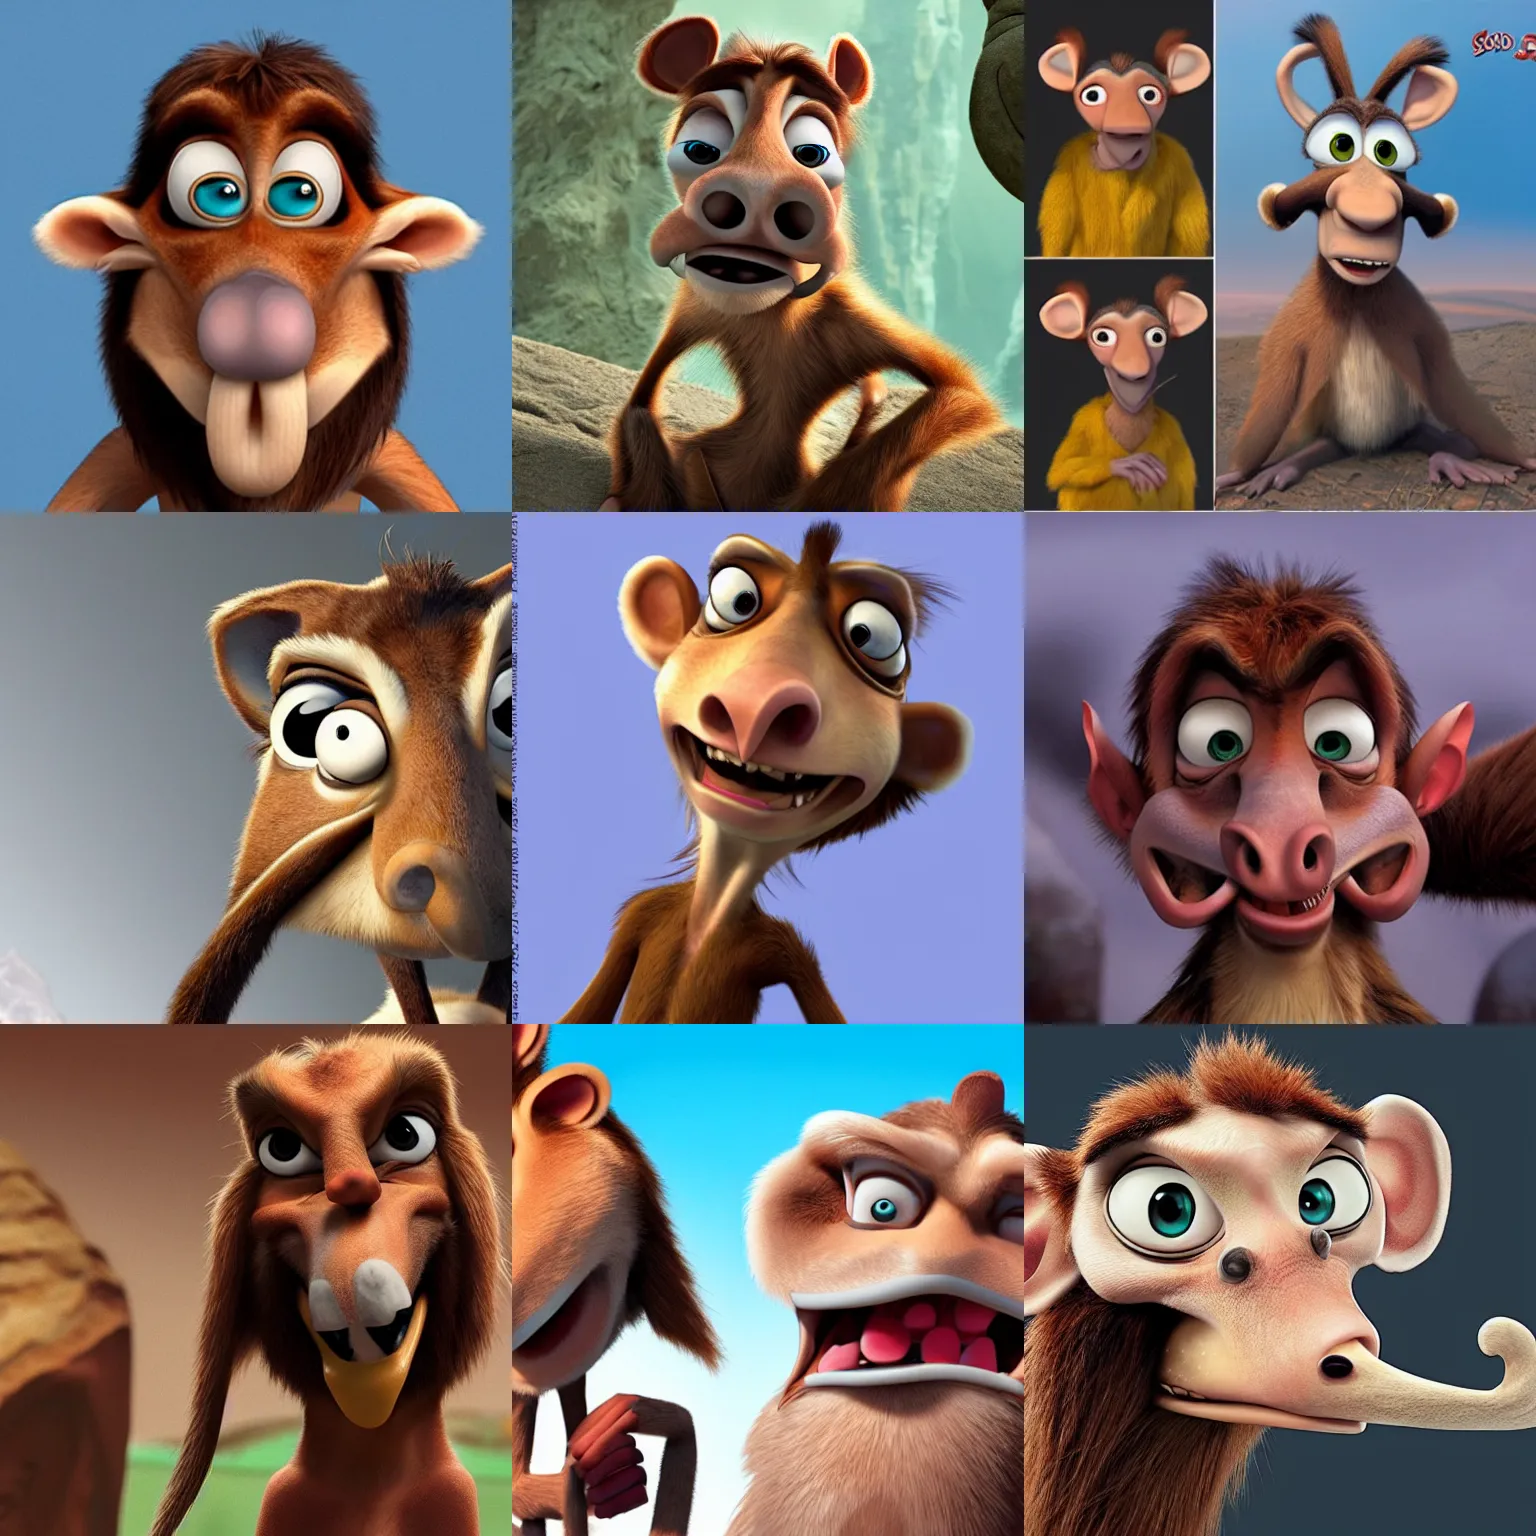 sid character from ice age | Stable Diffusion | OpenArt